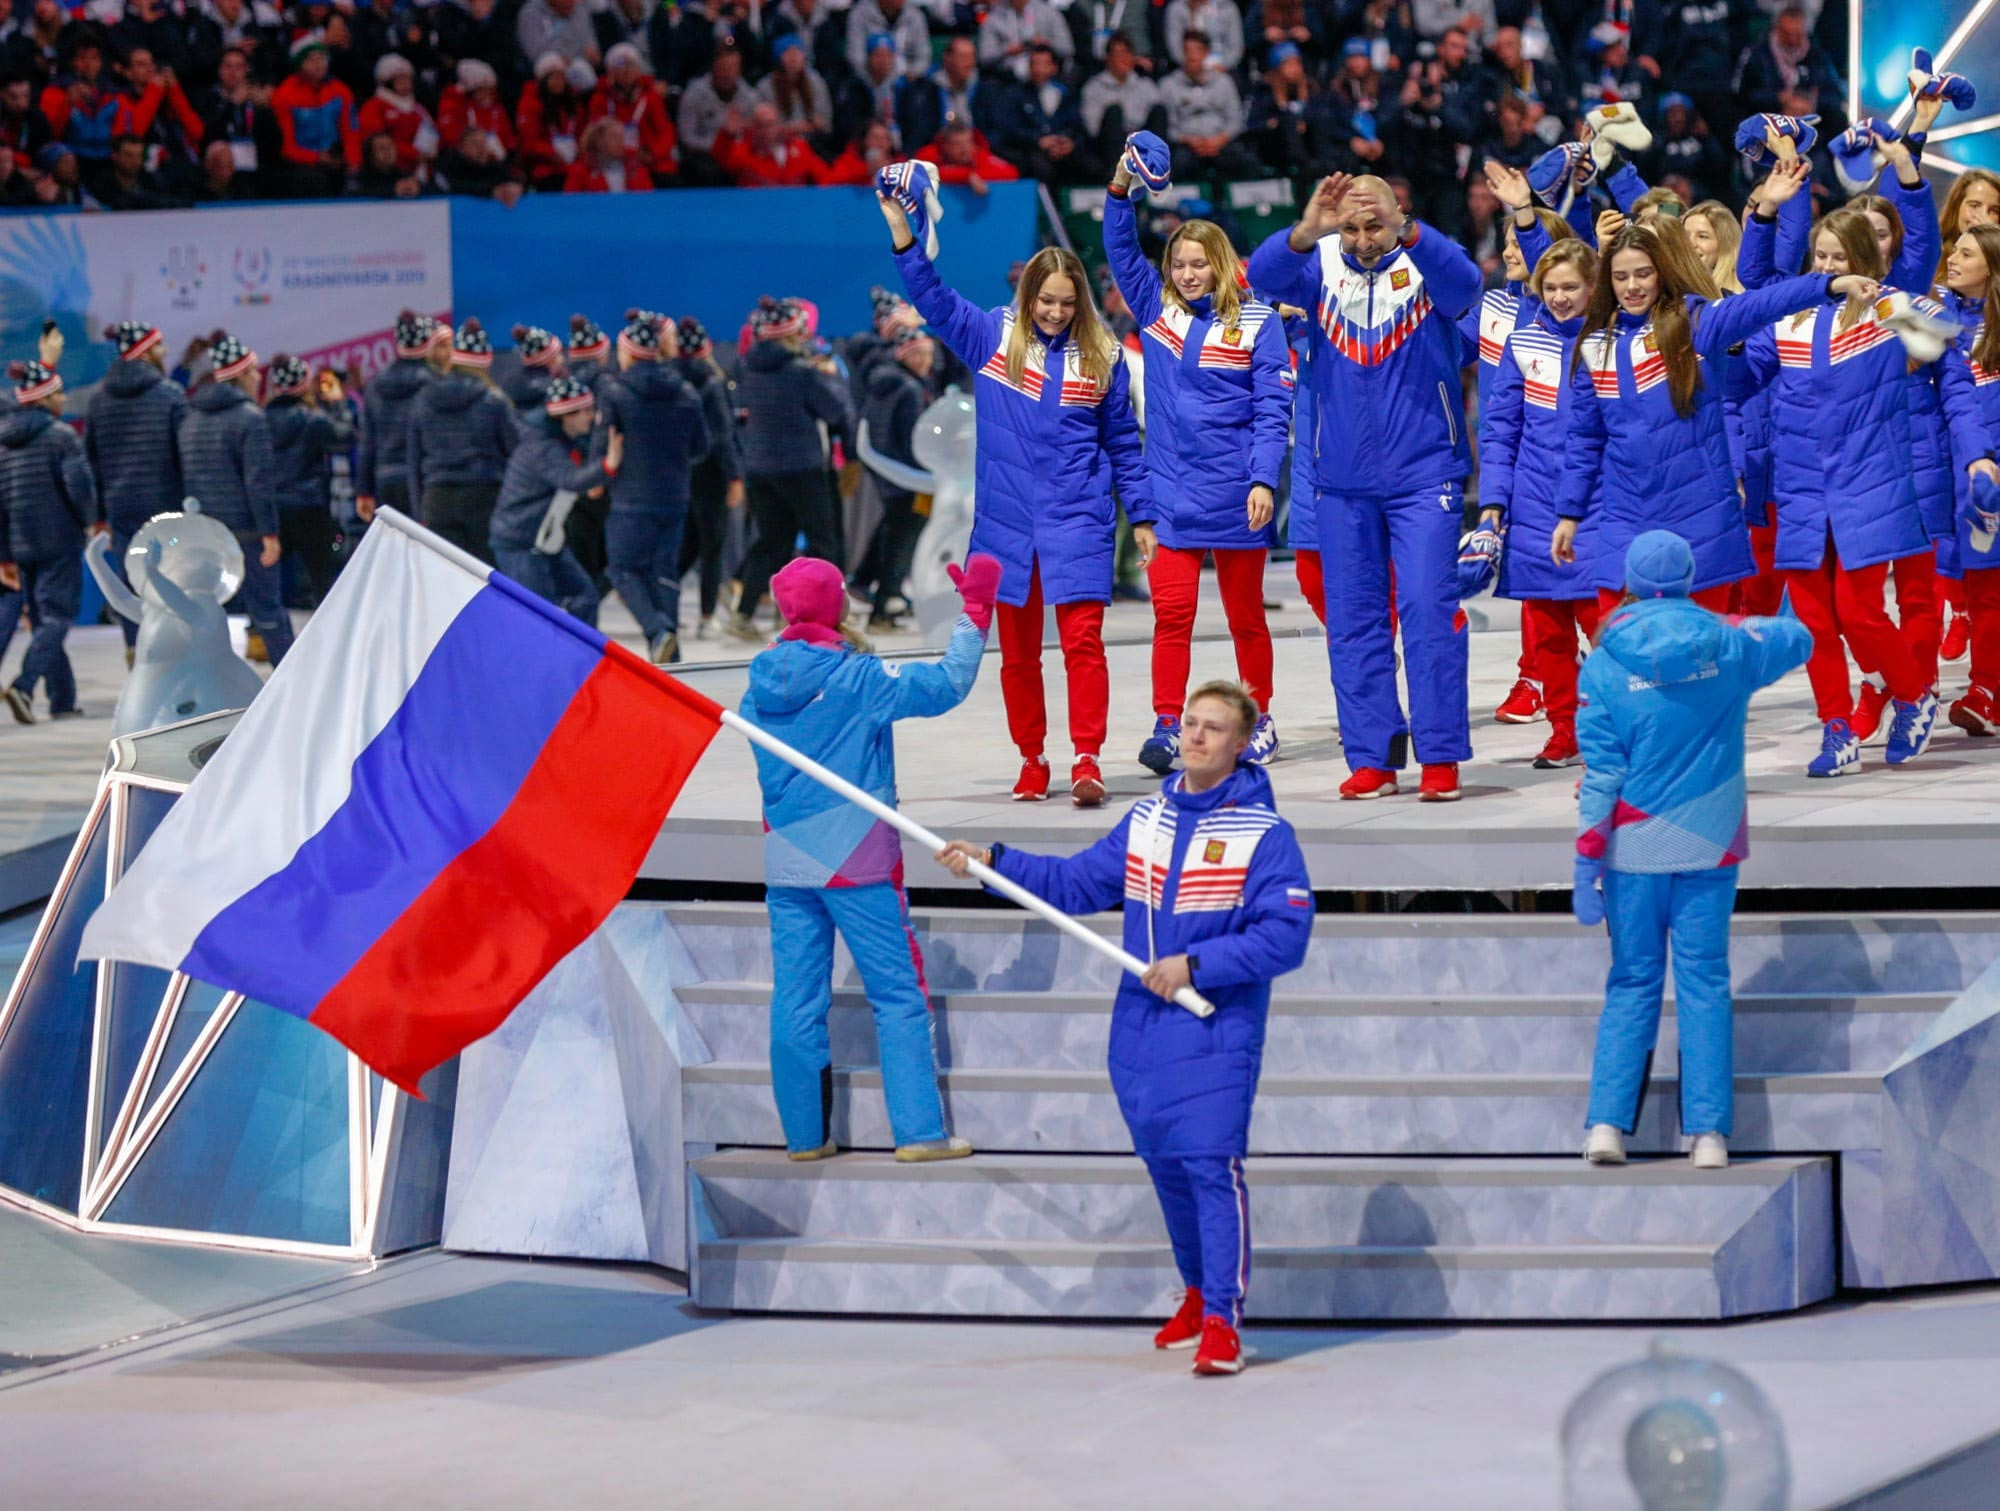 Russian athletes were banned from participating at Lake Placid 2023 due to the war in Ukraine ©FISU